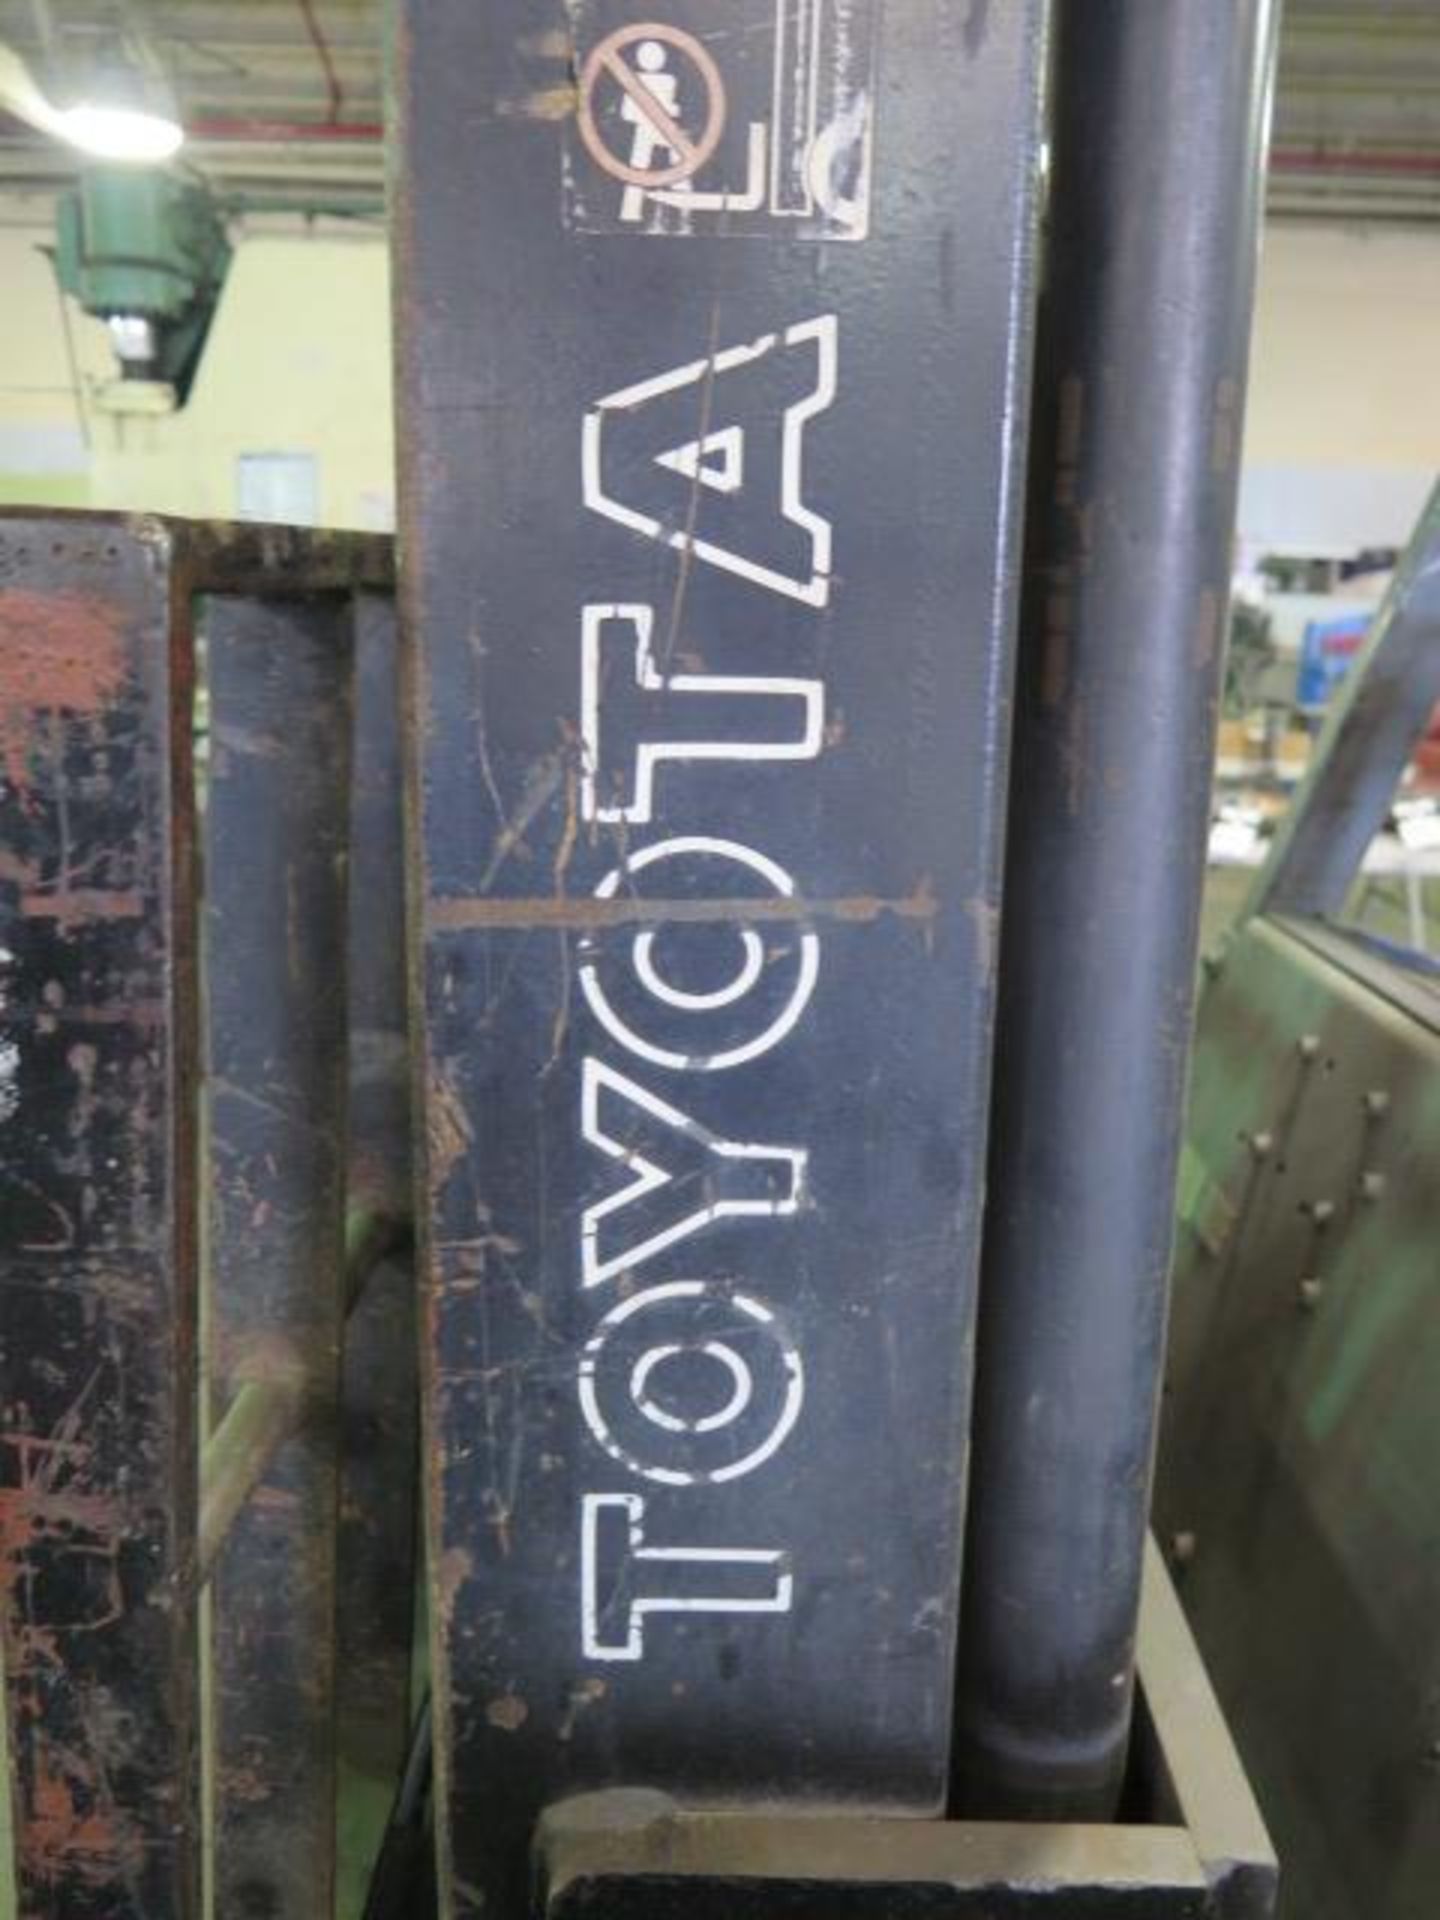 Toyota 42-6FGCU30 6000 Lb Cap LPG Forklift s/n 60775 w/ 2-Stage Mast, 132” Lift Height, SOLD AS IS - Image 15 of 15